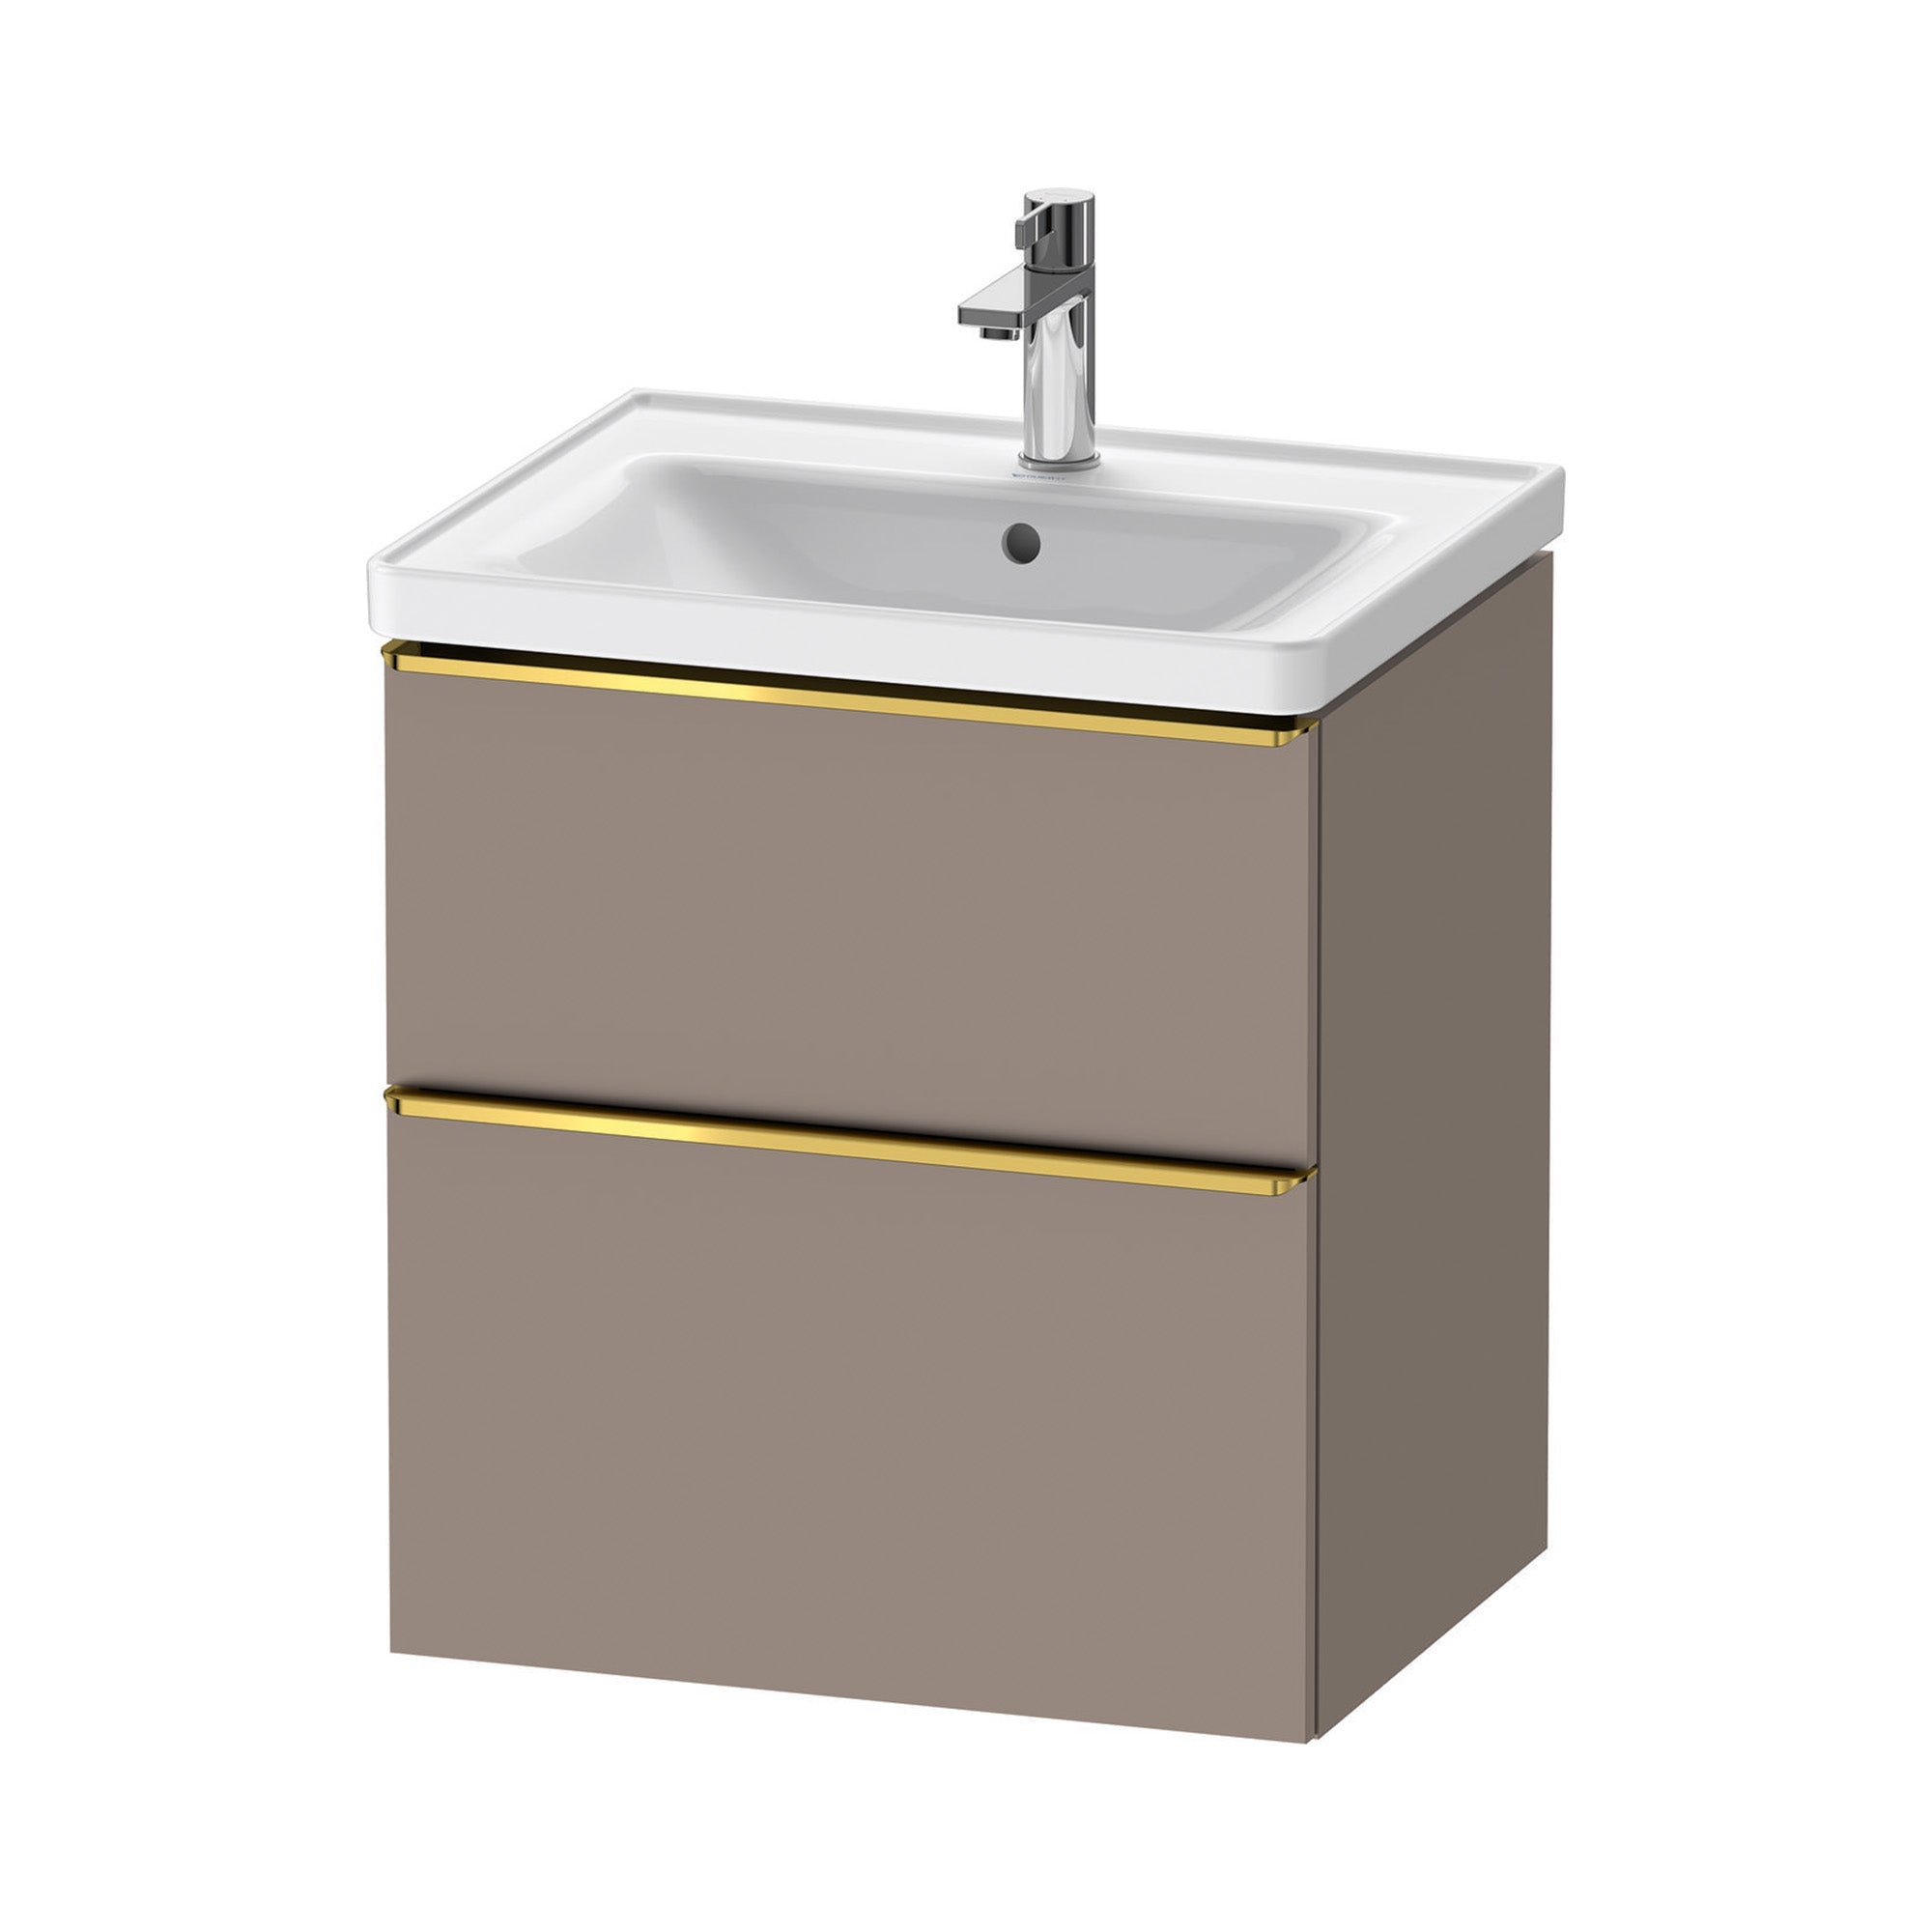 duravit d-neo 600 wall mounted vanity unit with d-neo basin basalt gold handles